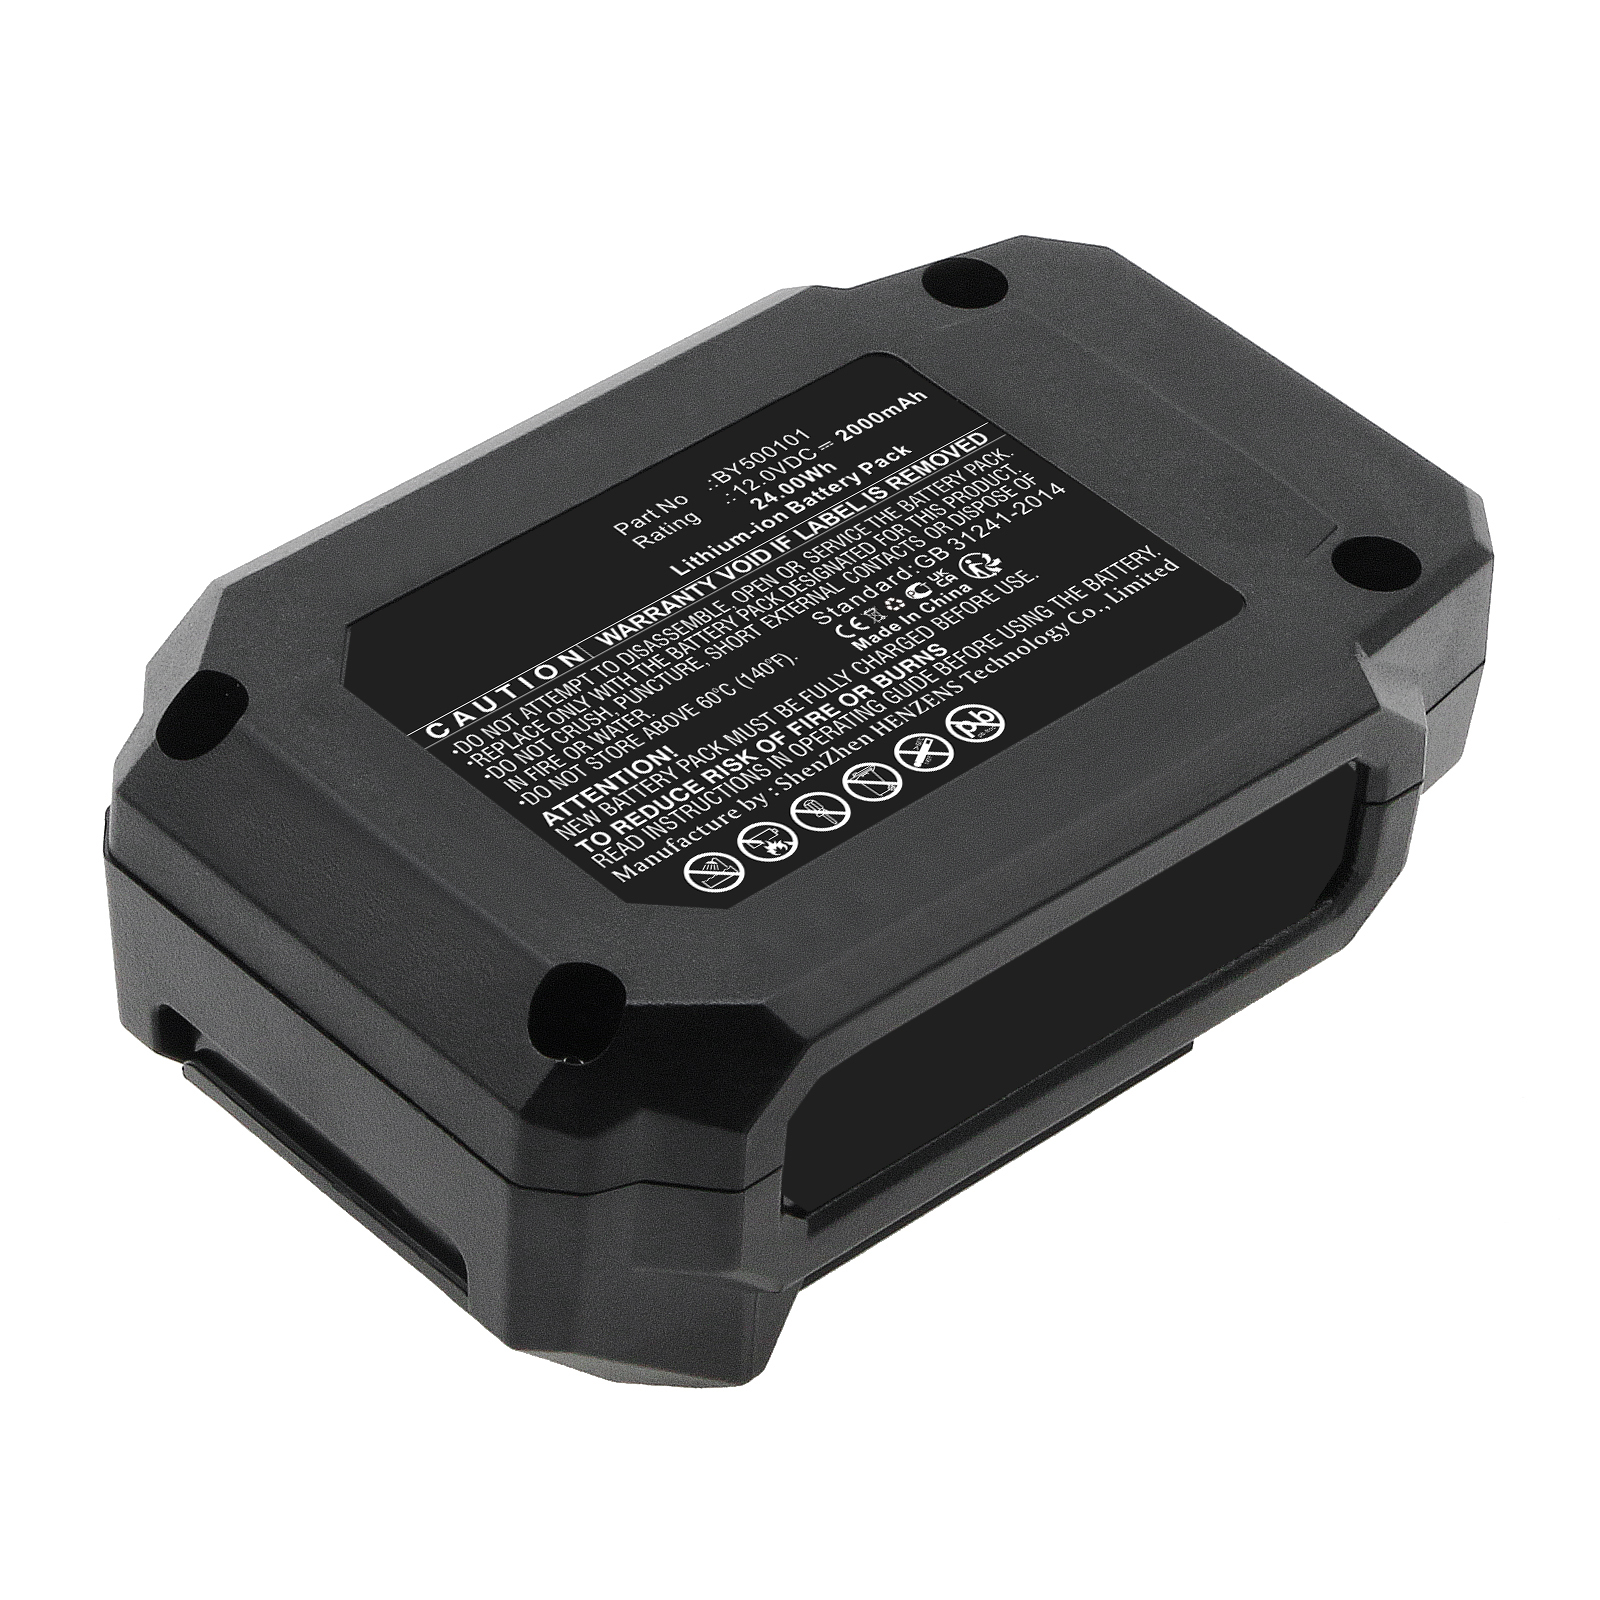 Synergy Digital Power Tool Battery, Compatible with Skil BY500101 Power Tool Battery (Li-ion, 12V, 2000mAh)